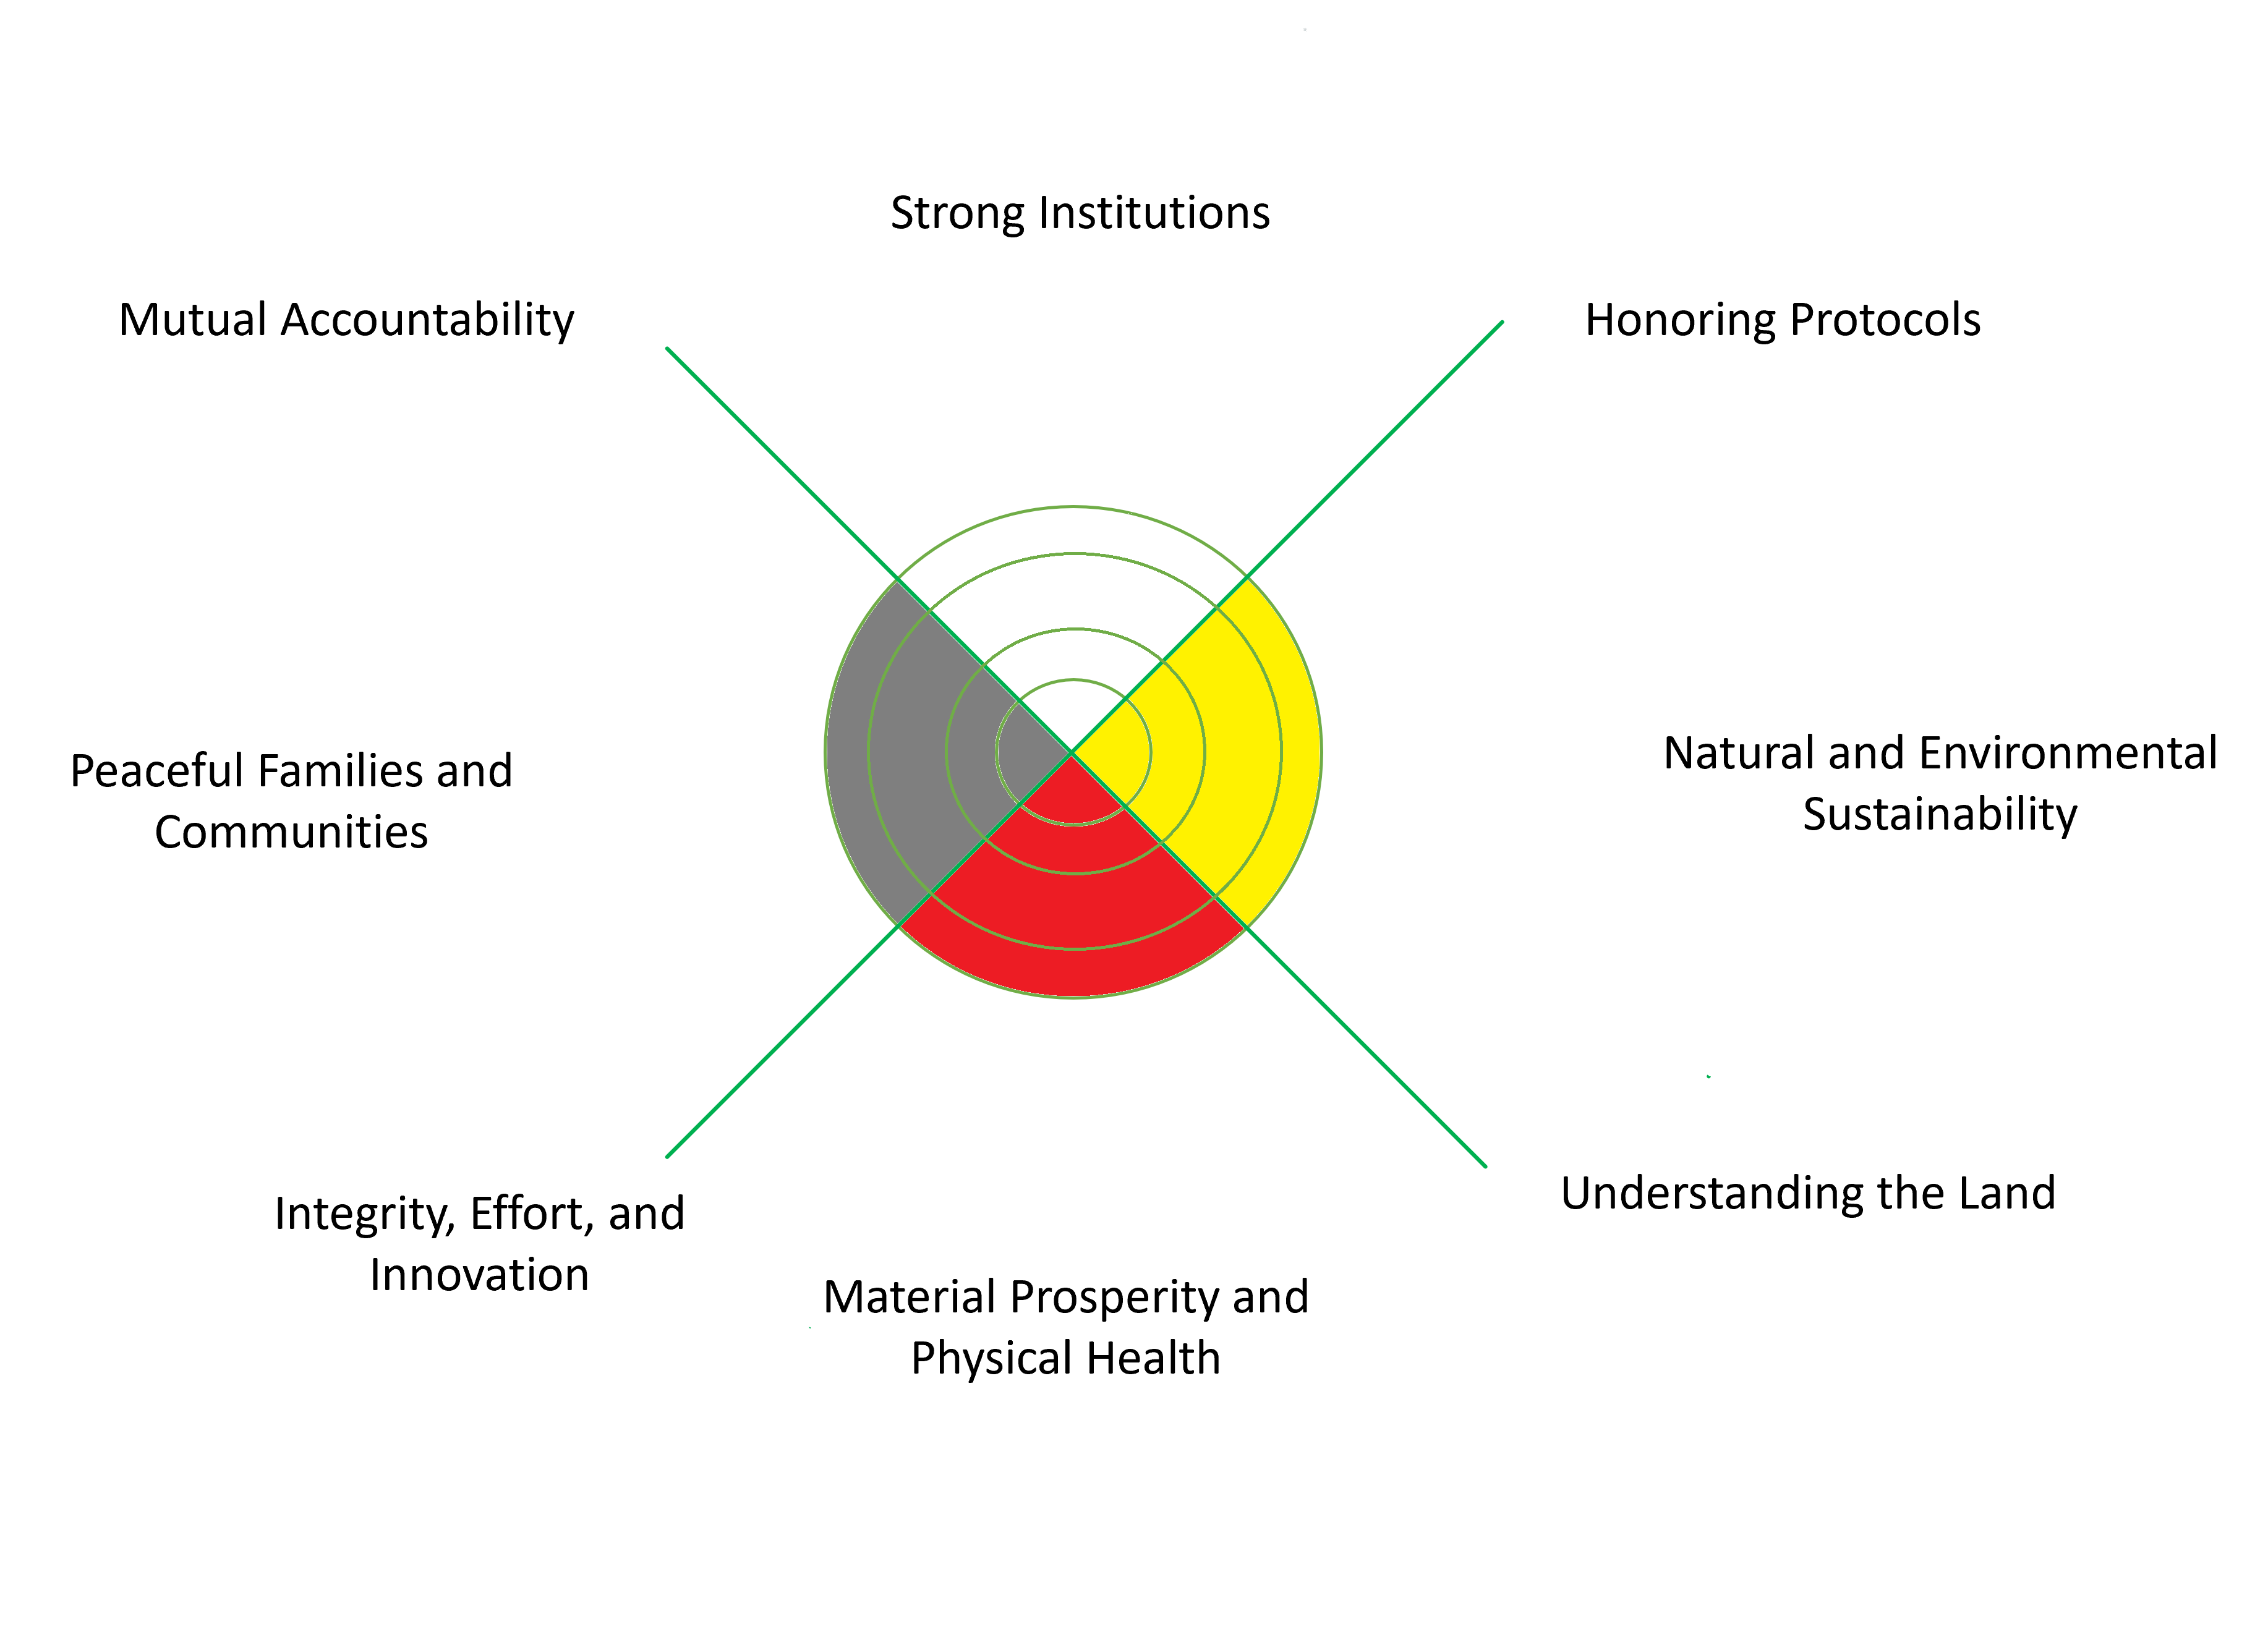 A bulls eye is divided into four equal sections by two opposite bisecting lines running through the circle diagonally. The top or north quarter, "Strong Institutions" is bounded by the lines "Mutual Accountability" to the left and "Honoring Protocols". The right or east quadrant is called "Natural and Environmental Sustainability" and is bounded by the lines "Honoring Protocols" and "Understanding the Land". The bottom or south quadrant is called "Material Prosperity and Physical Health" and is bounded by the lines labeled "Understanding the Land" and "Integrity, Effort, and Innovation". The left or west quadrant is called "Peaceful families and communities" and is bounded by "Integrity, Effort, and Innovation" and "Mutual Accountability".